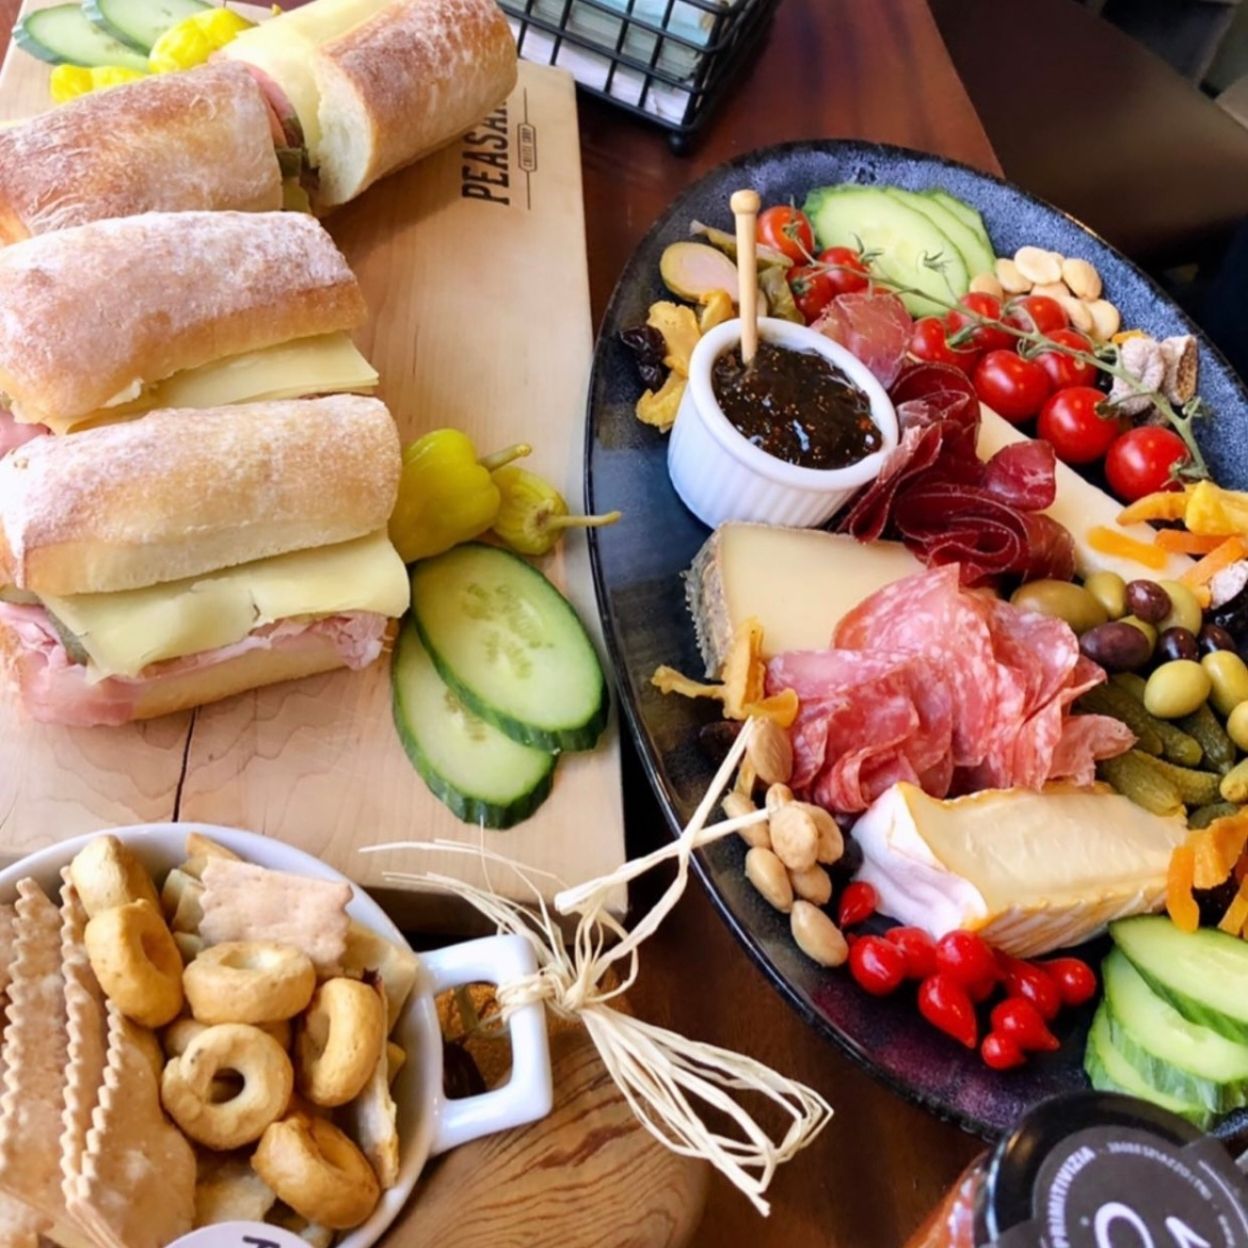 Calgary-things-to-do-best-restaurants-Calgary-date-night-ideas-fun-date-ideas-calgary-date-ideas-for-couples-calgary-adventure-tours-alberta-food-tours-cycle-tours-charcuterie-platter-cook-with-cooks-metrovino-food-tours